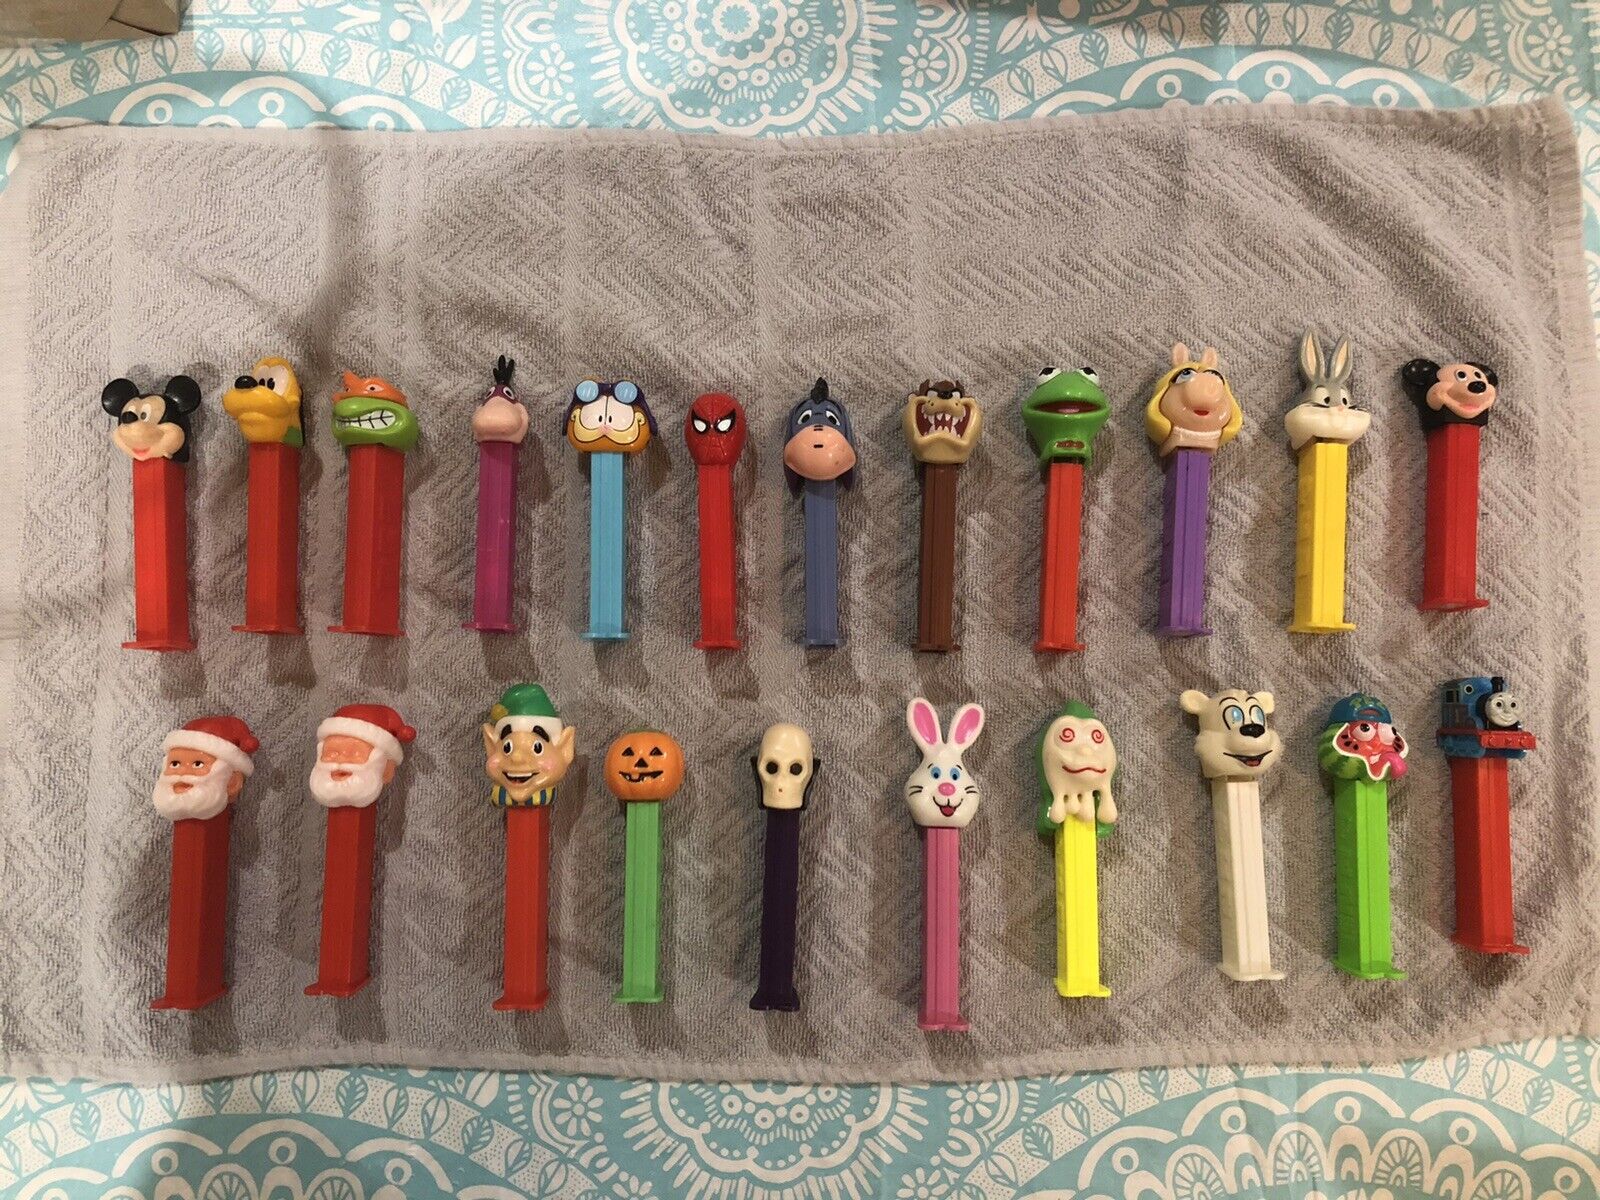 Vintage Pez Dispensers - 22 different characters, 5 with candy